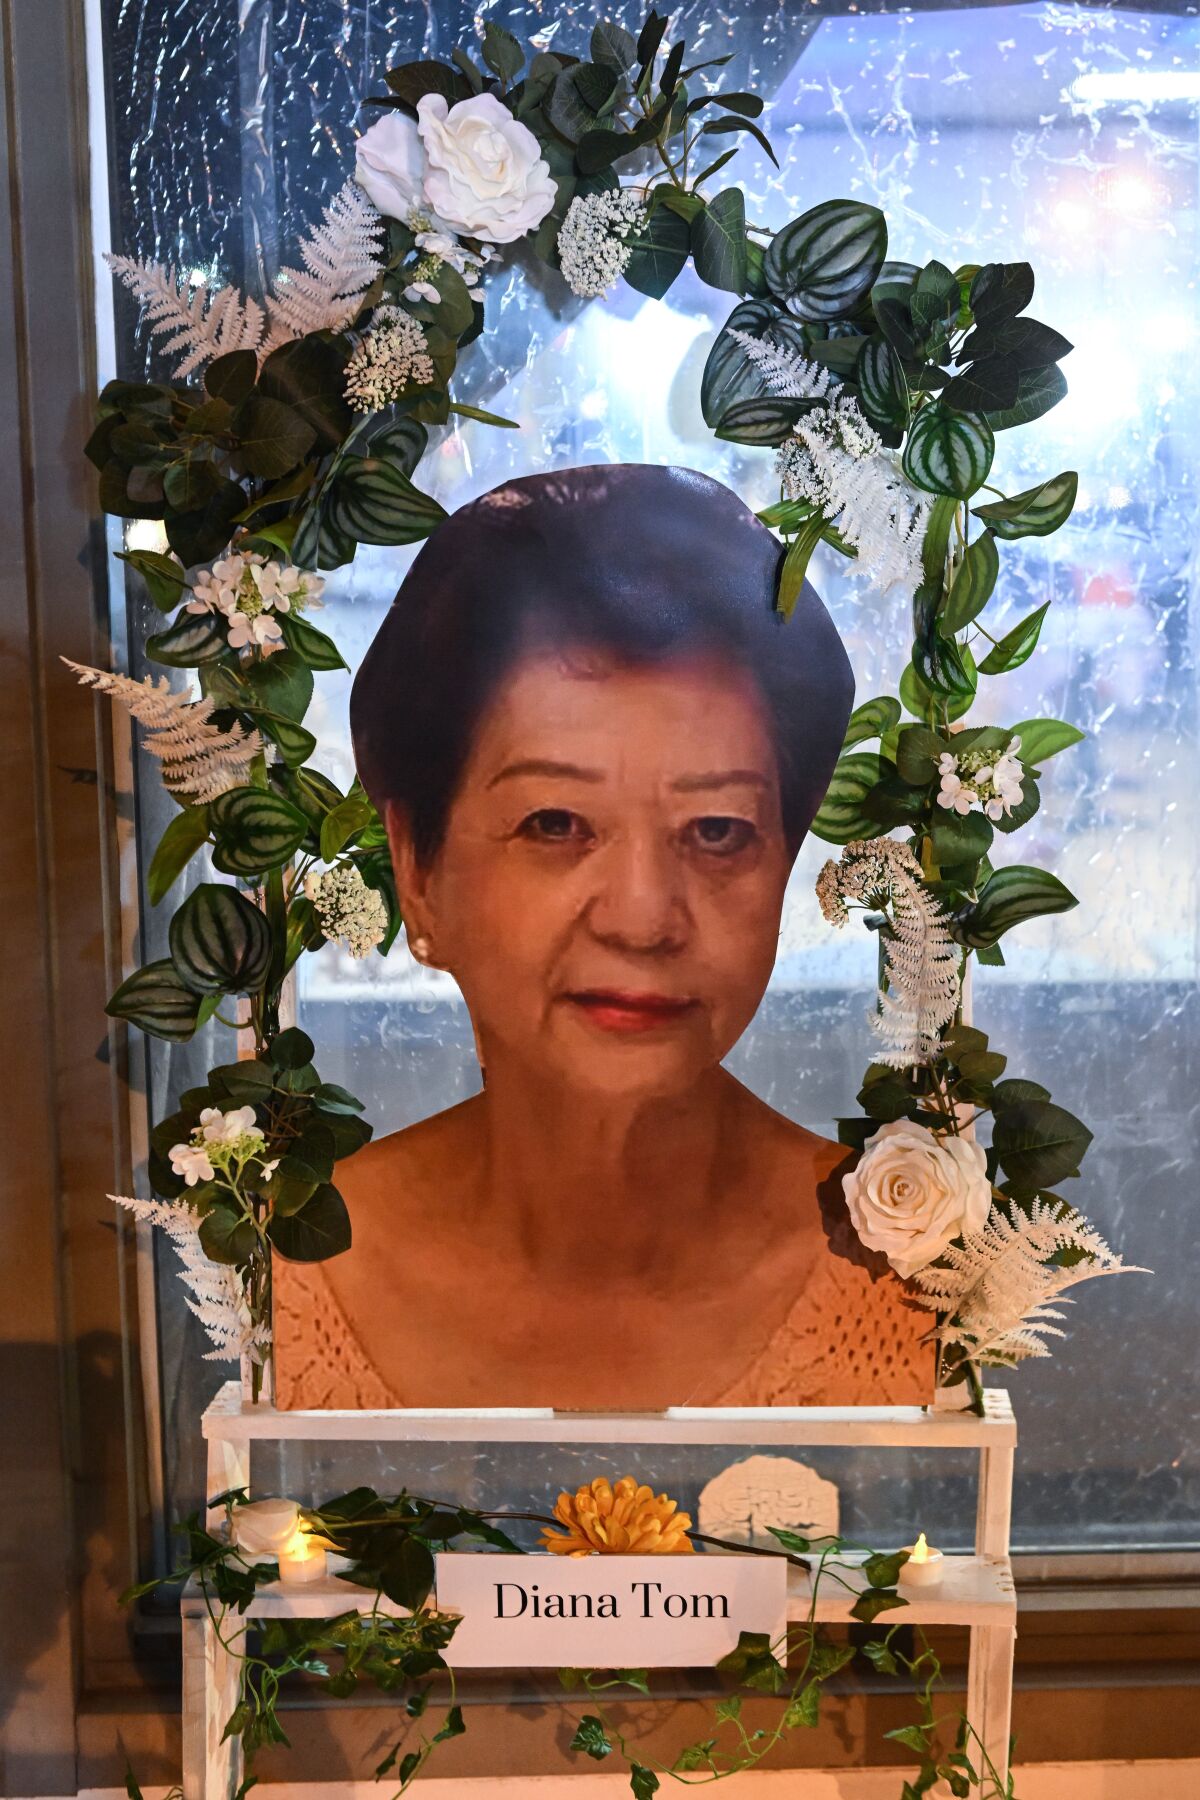 A portrait of Diana Man Ling Tom sits on display in front of the dance studio.